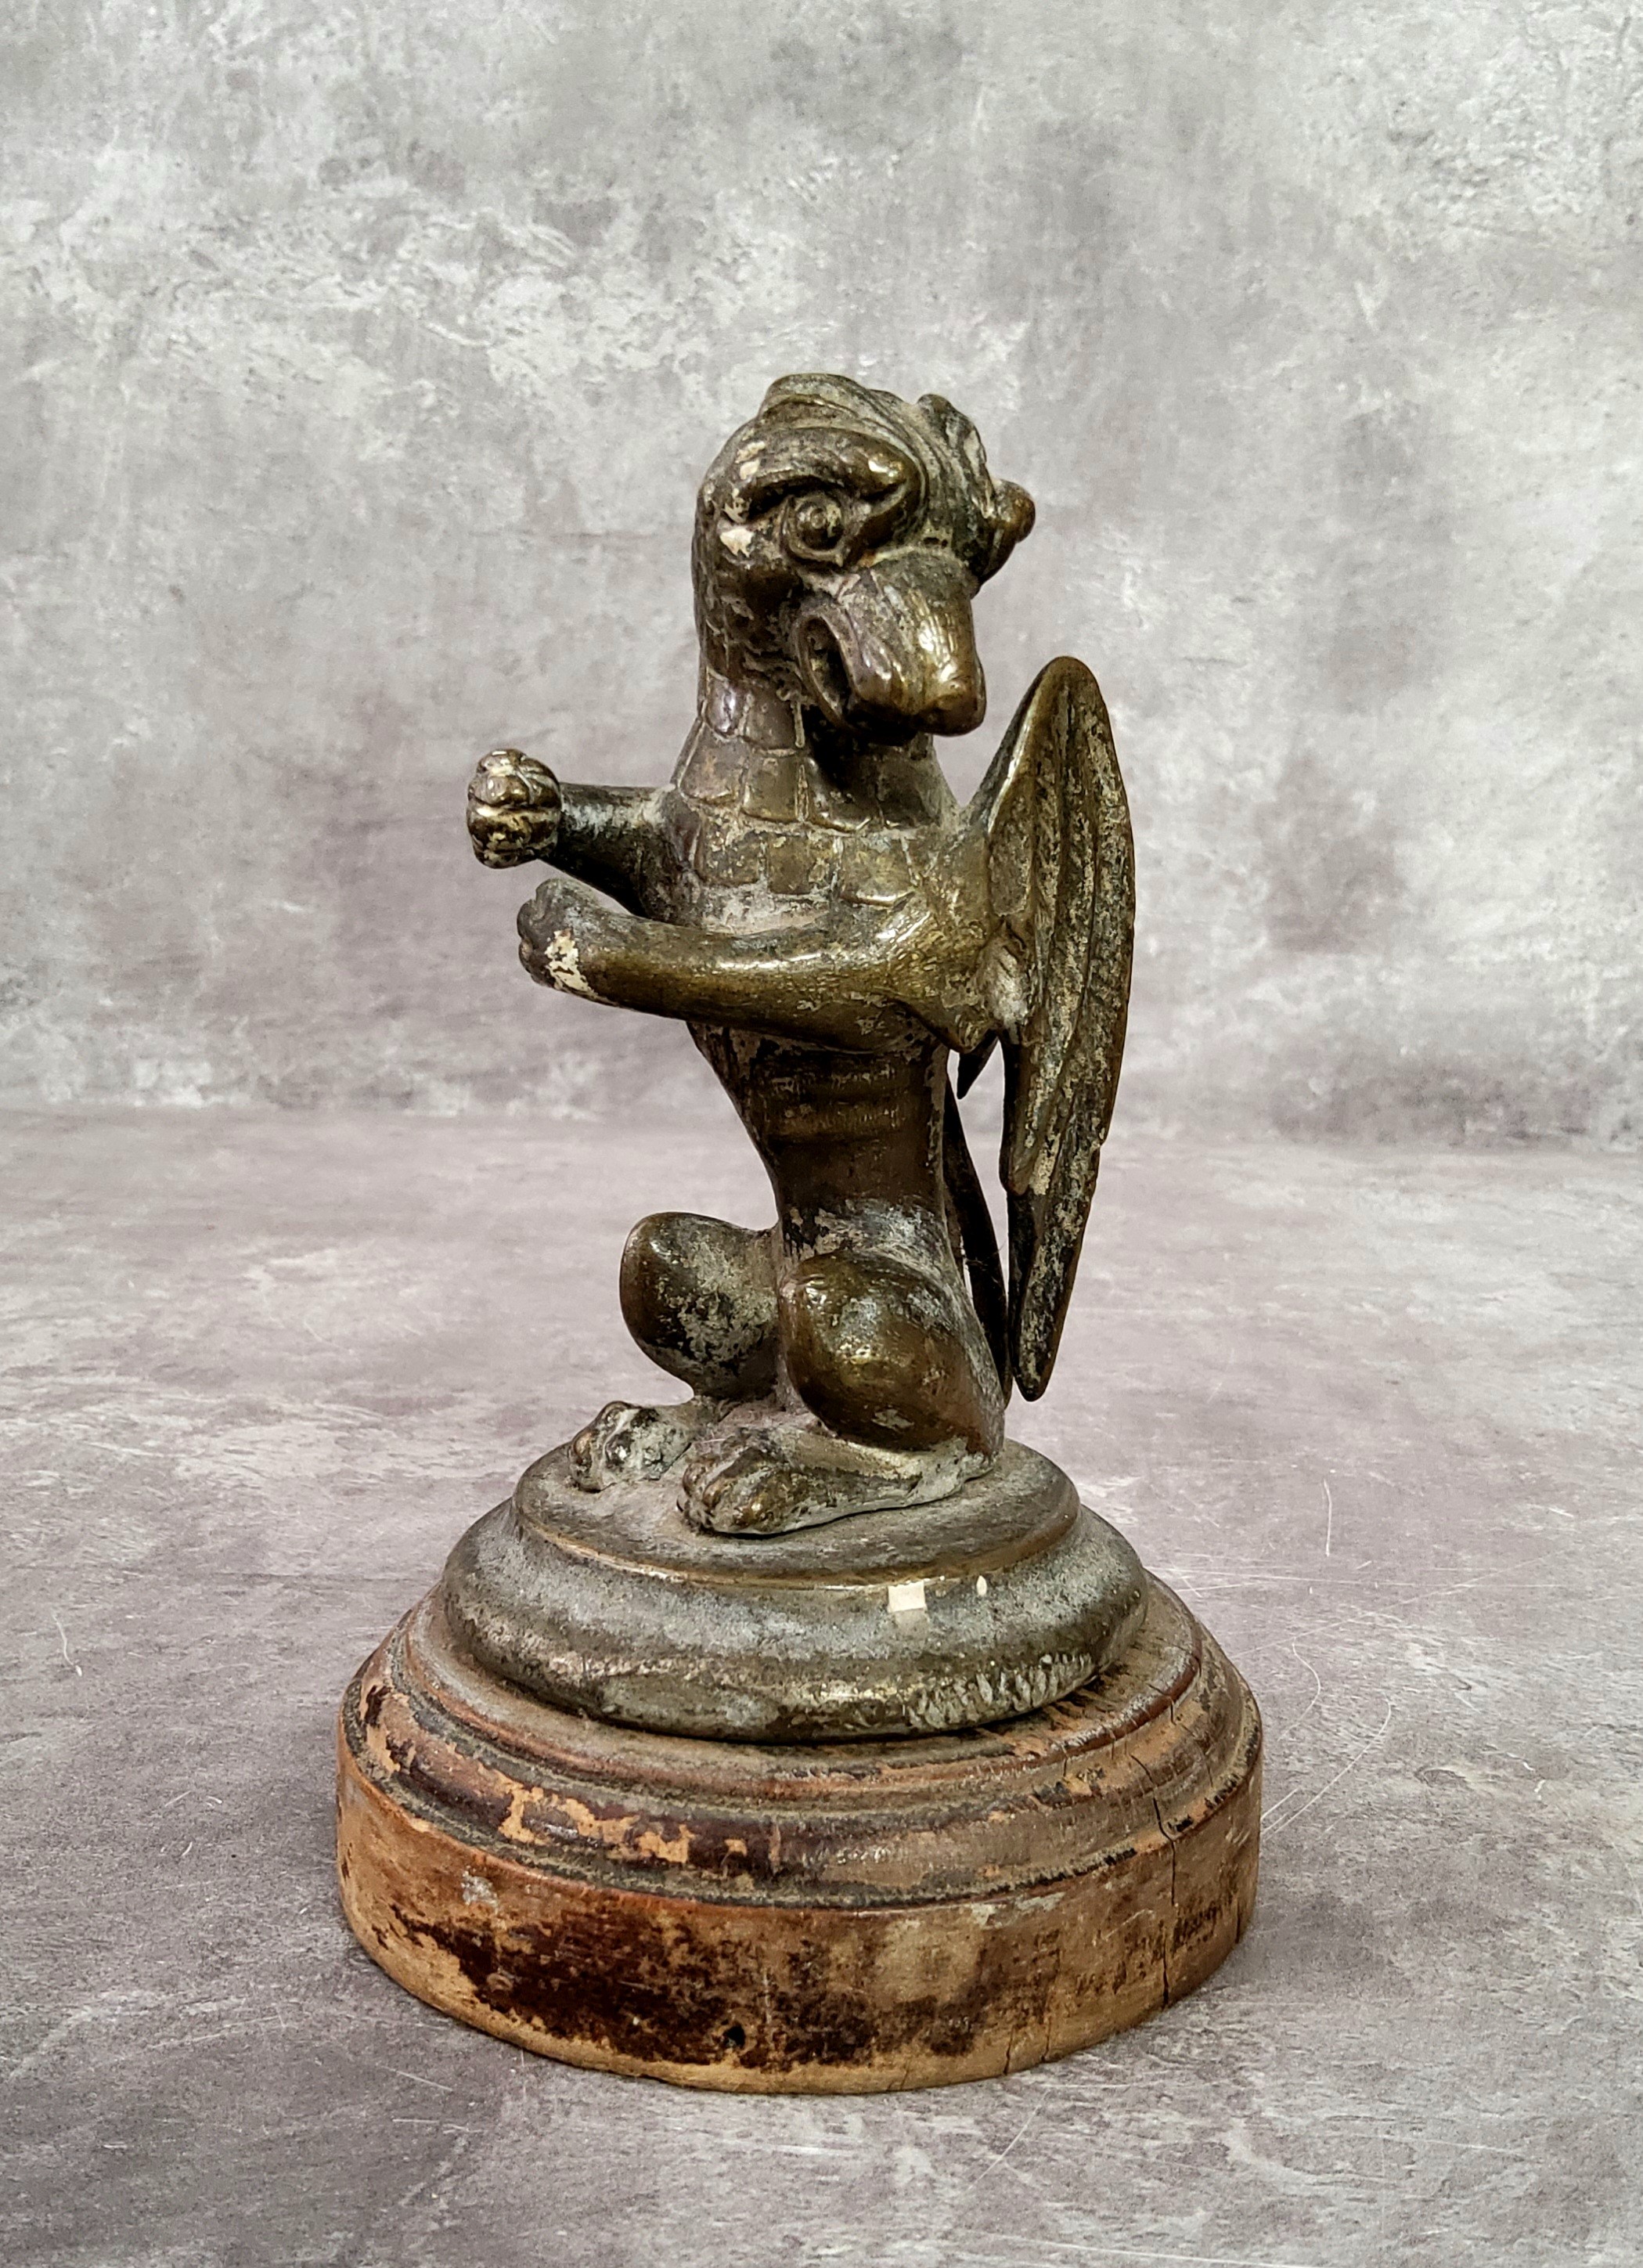 Automobilia - A bronze car mascot in the form of a seated Gryphon / griffin with folded wings